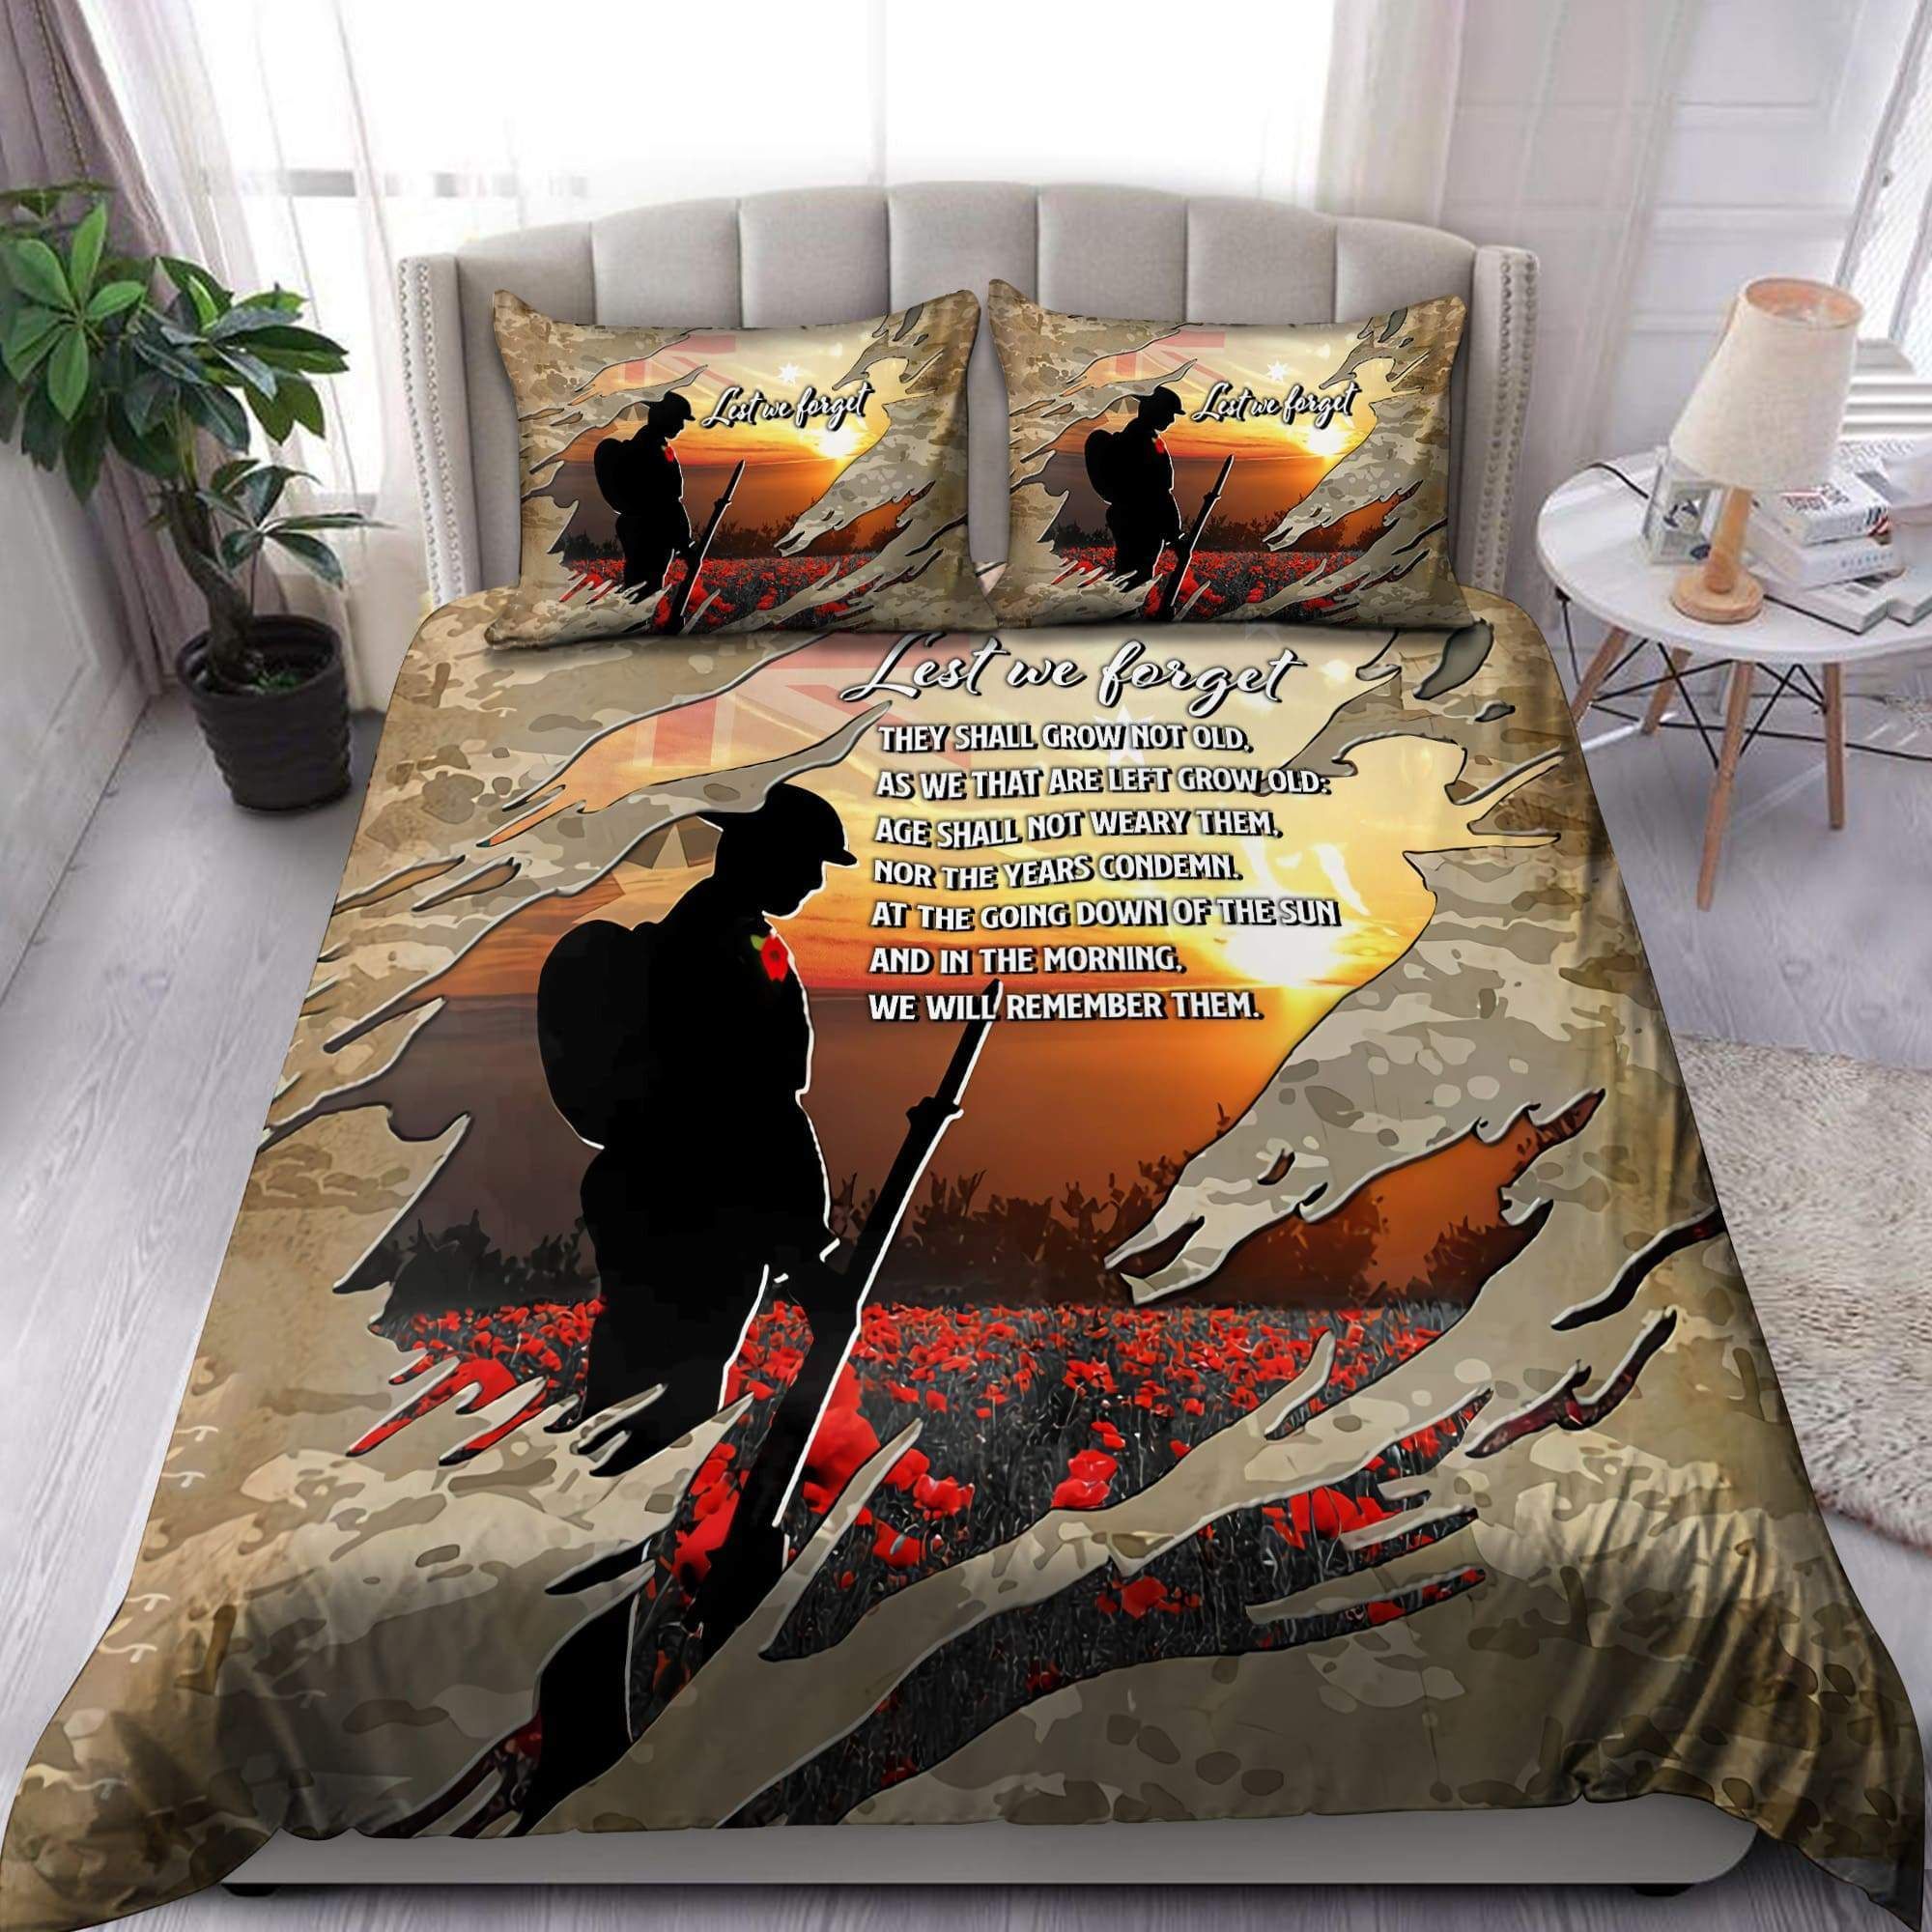 Anzac Day Lest We Forget Bedding Set Bed Sheets Spread Comforter Duvet Cover Bedding Sets